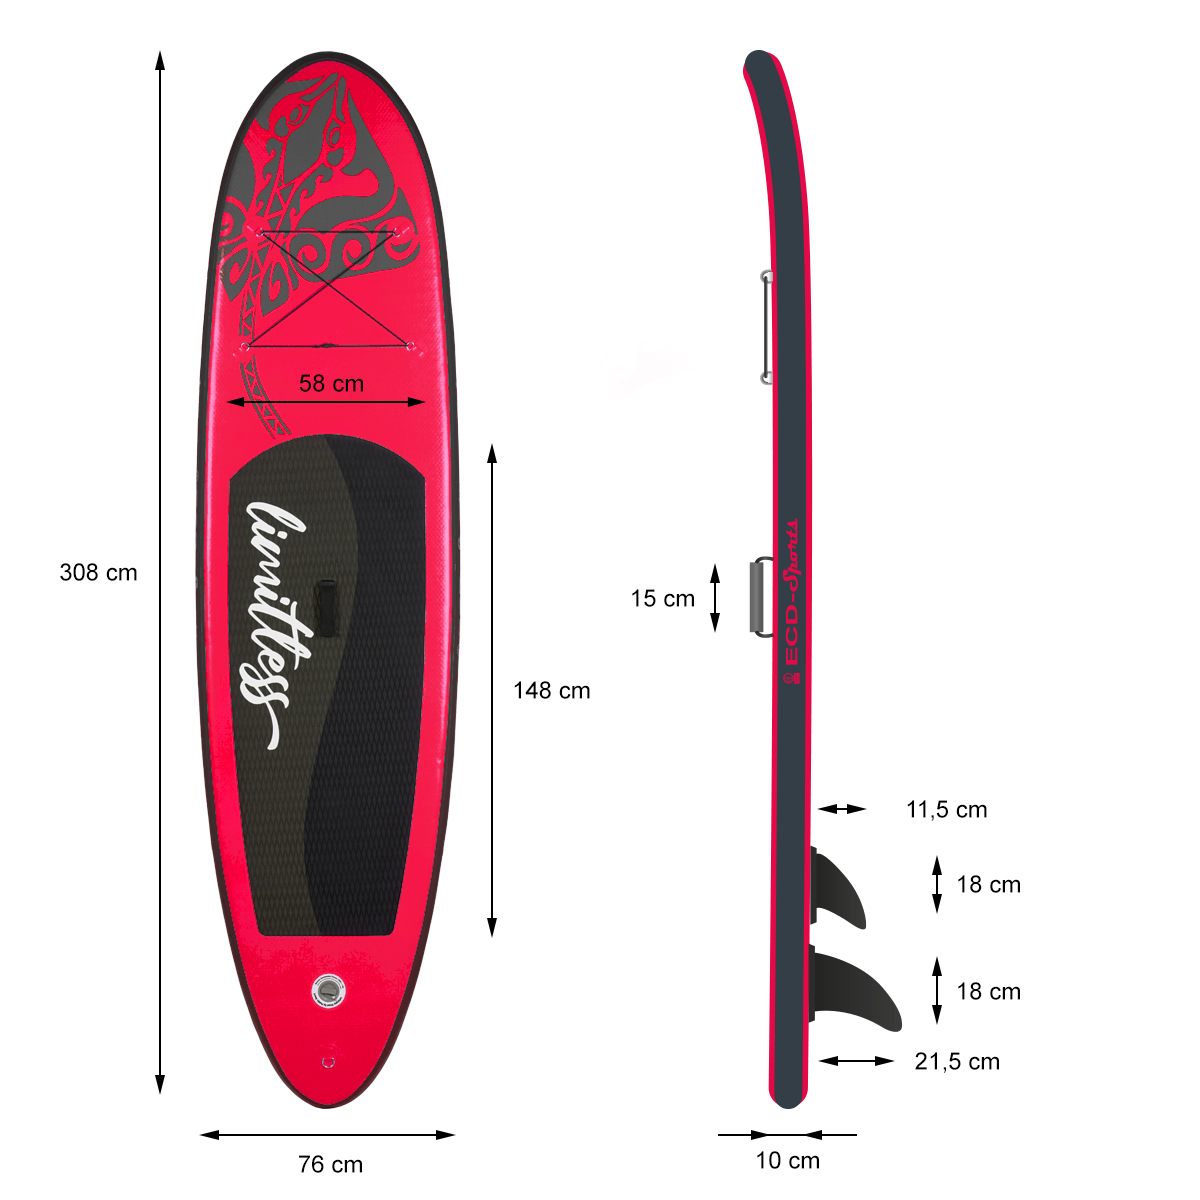 ECD-GERMANY Aufblasbares Stand Up Paddle Board Up Red Stand Paddle